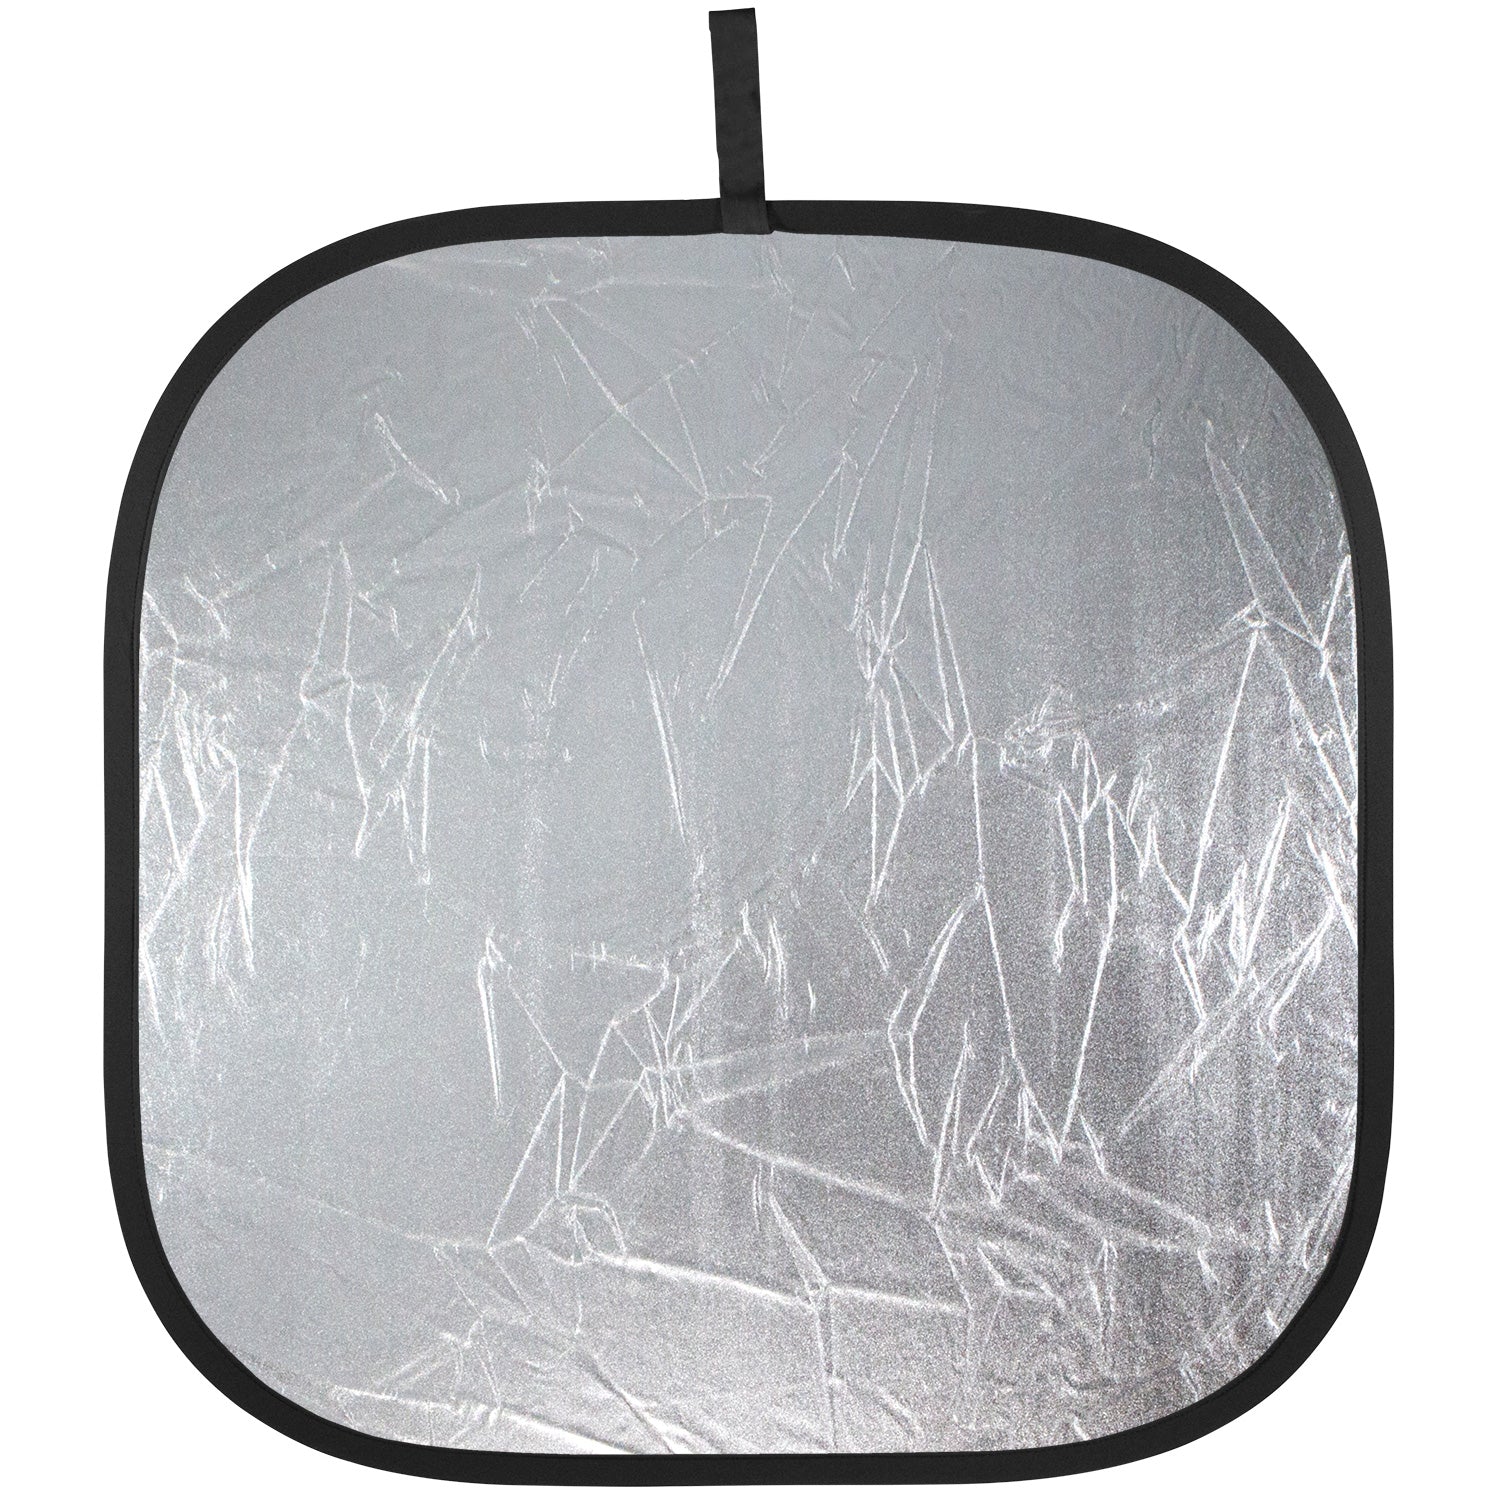 Illuminator Collapsible 2-in-1 Silver/White Bounce Reflector (42")